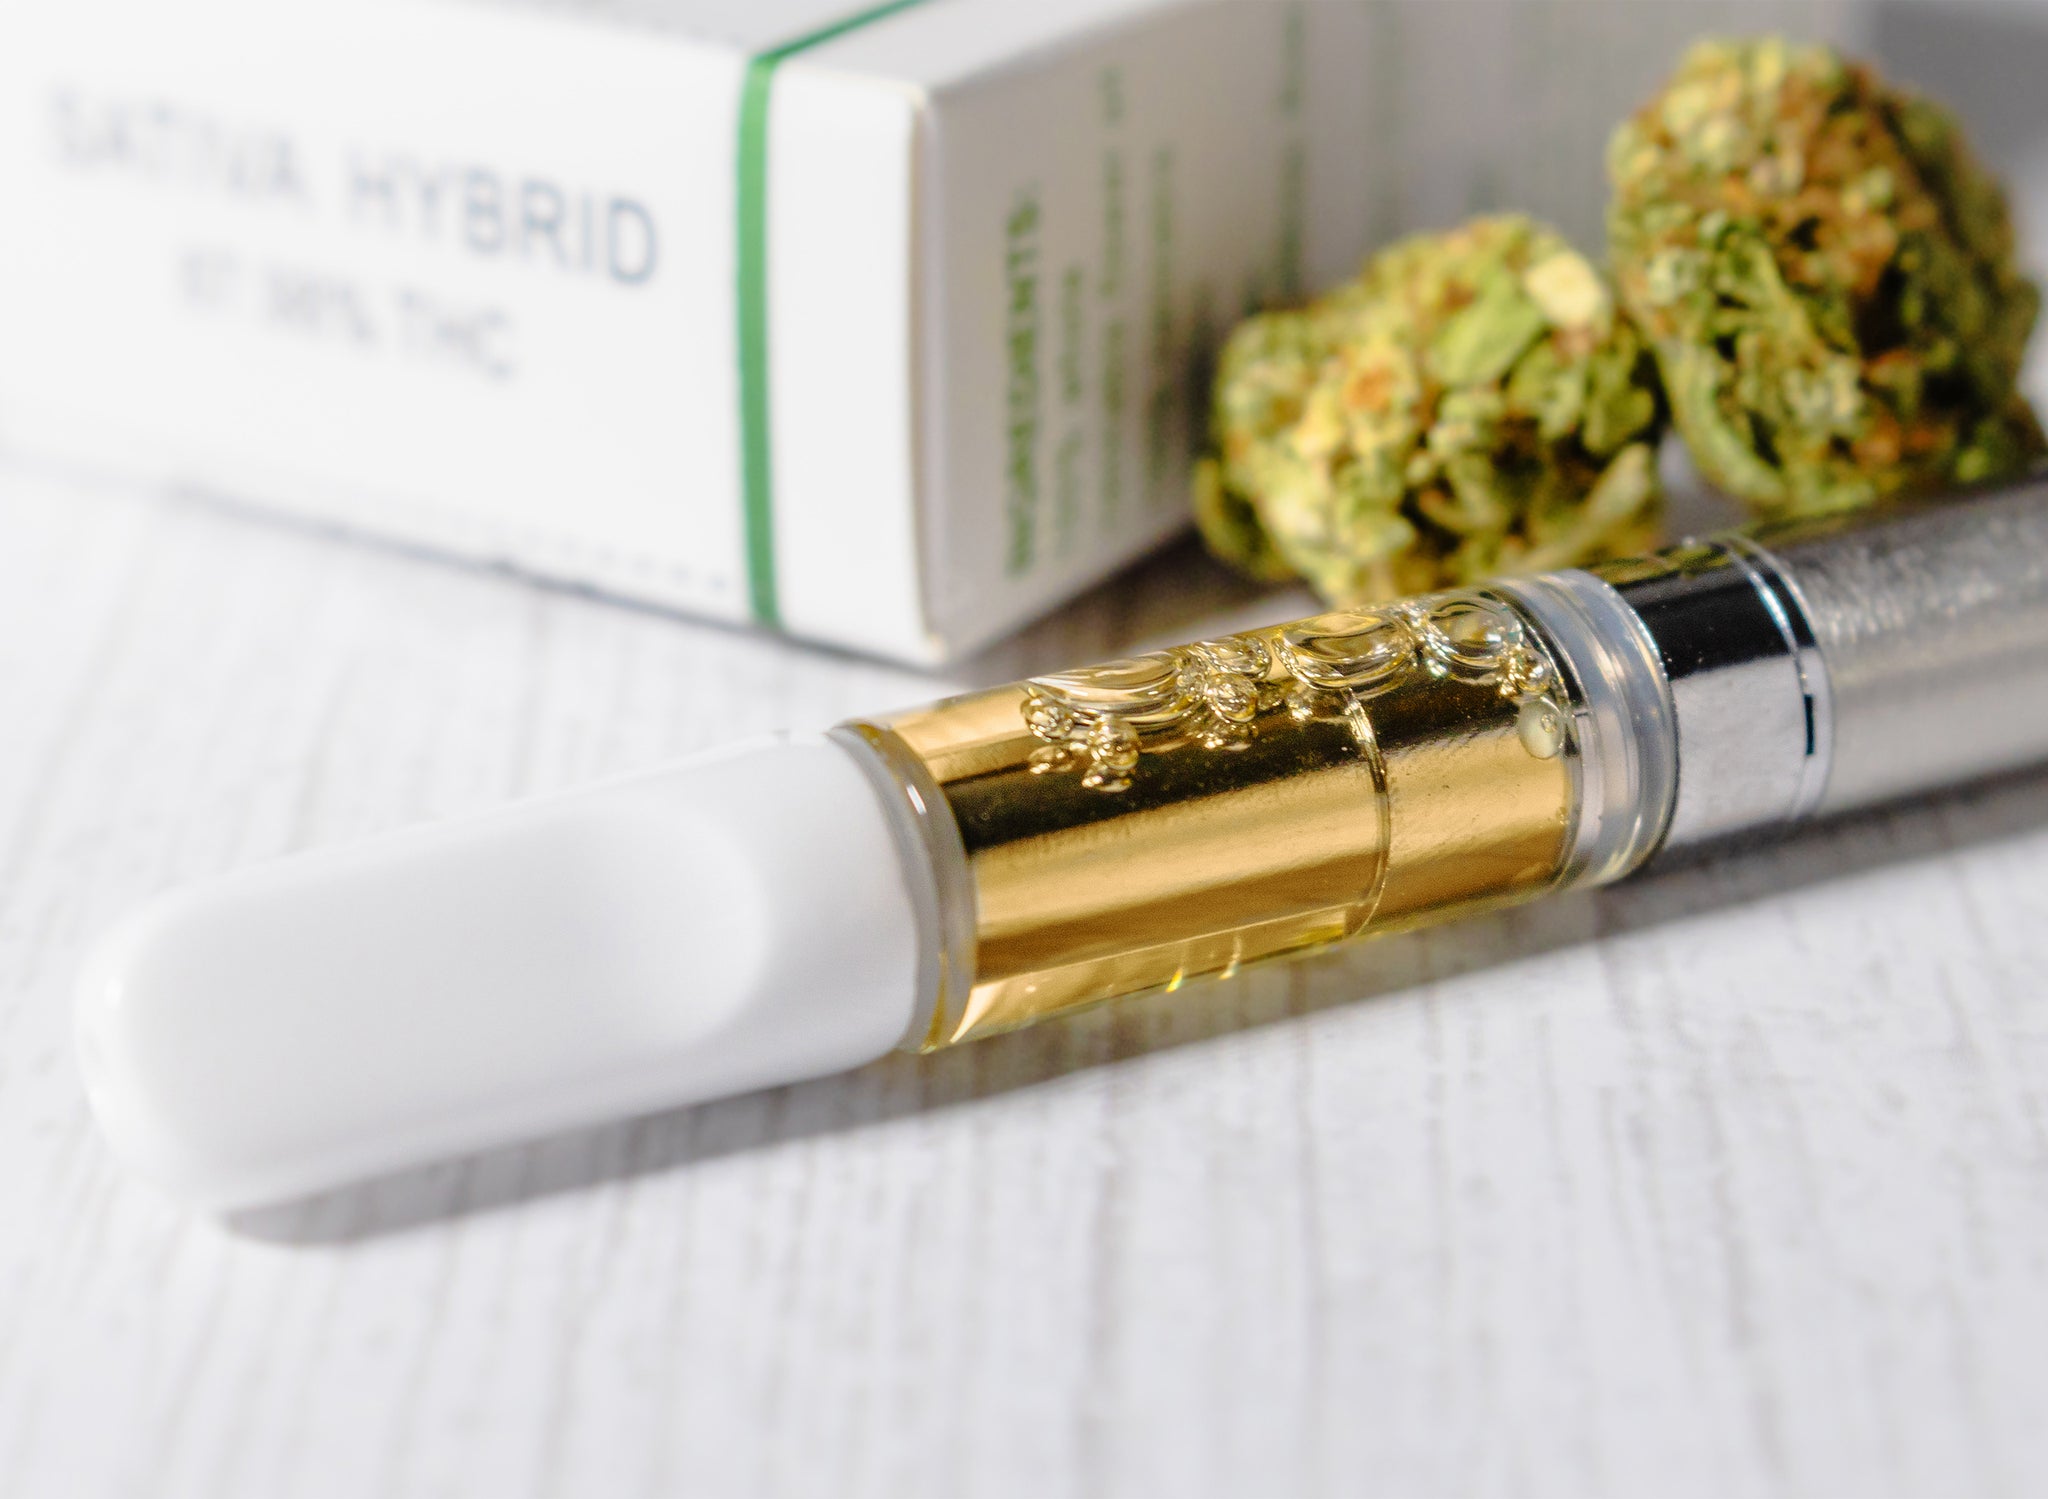 How To Tell If You Have Fake THC Dab Carts